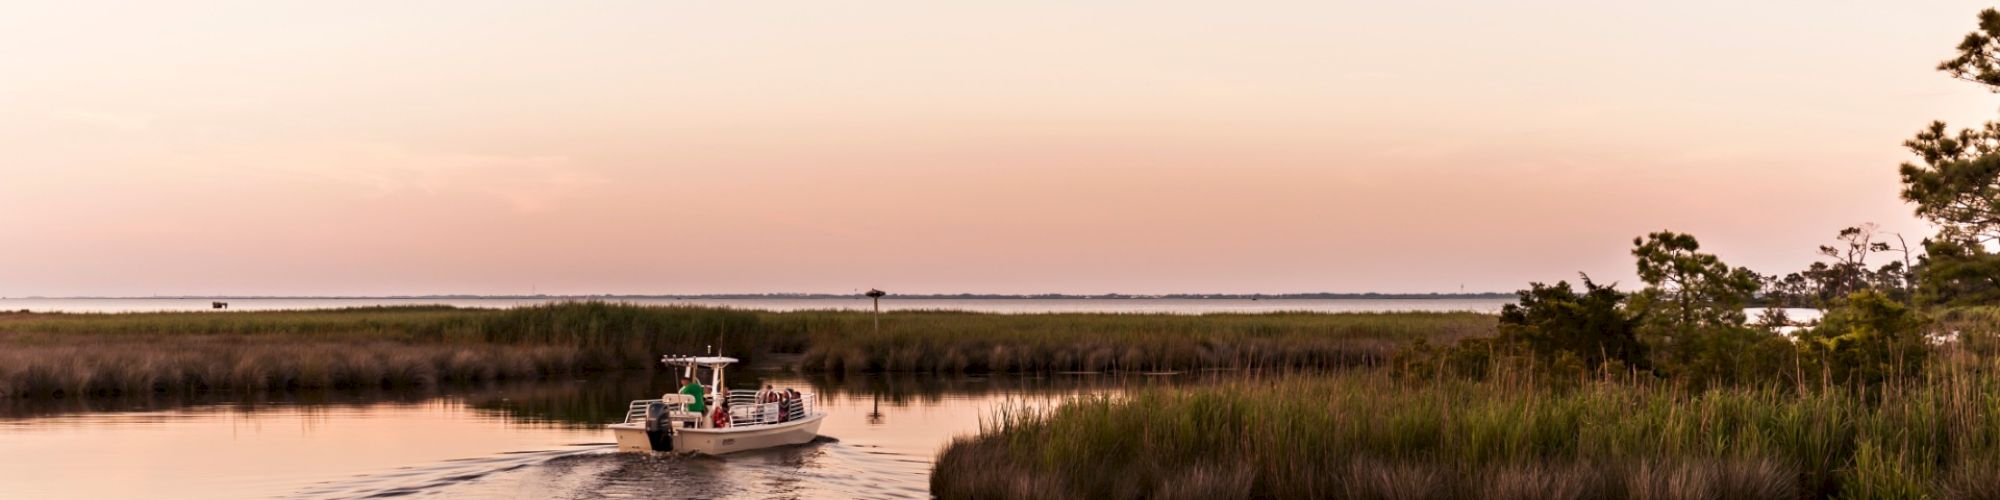 A small boat travels along a narrow waterway bordered by tall grass and trees, under a calm sky with a gentle sunset glow in the background.